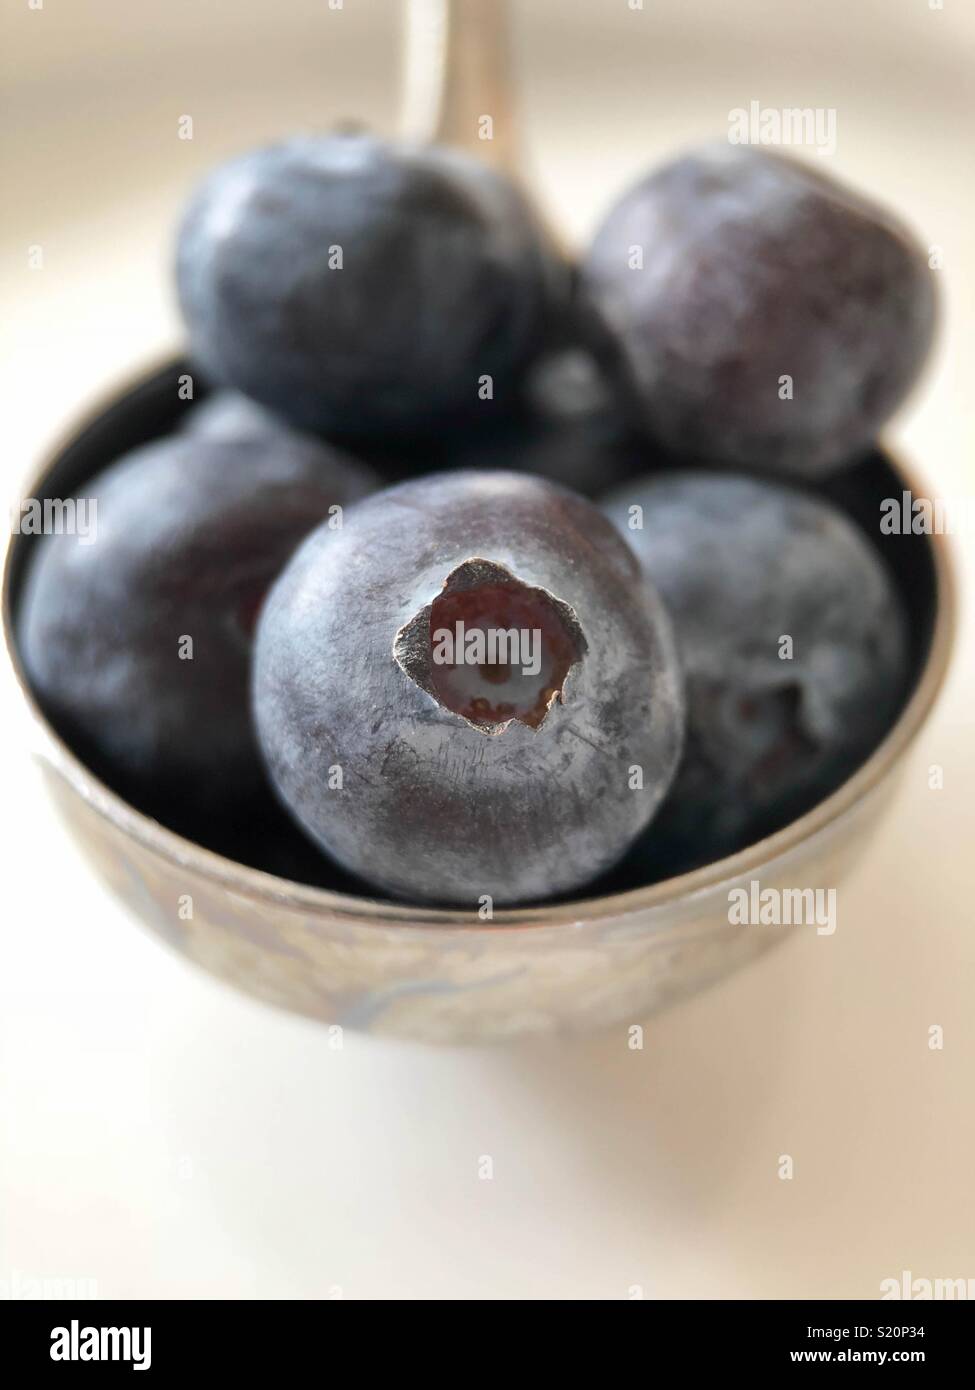 Tablespoon of blueberries Stock Photo